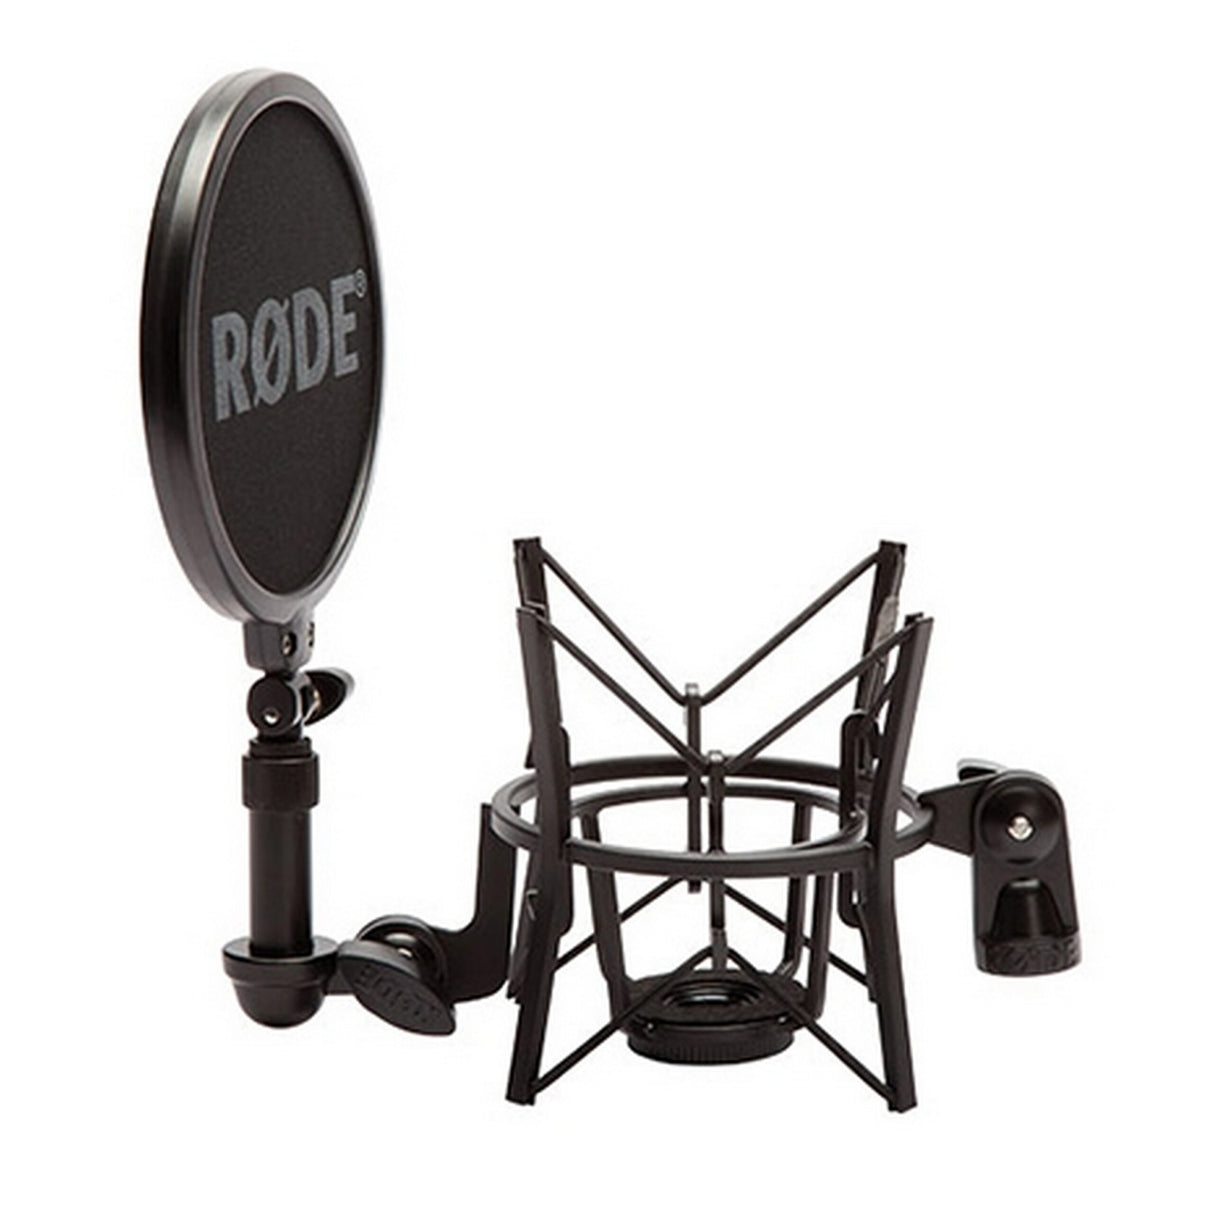 RODE SM6 Shockmount with Detachable Pop Filter (Used)